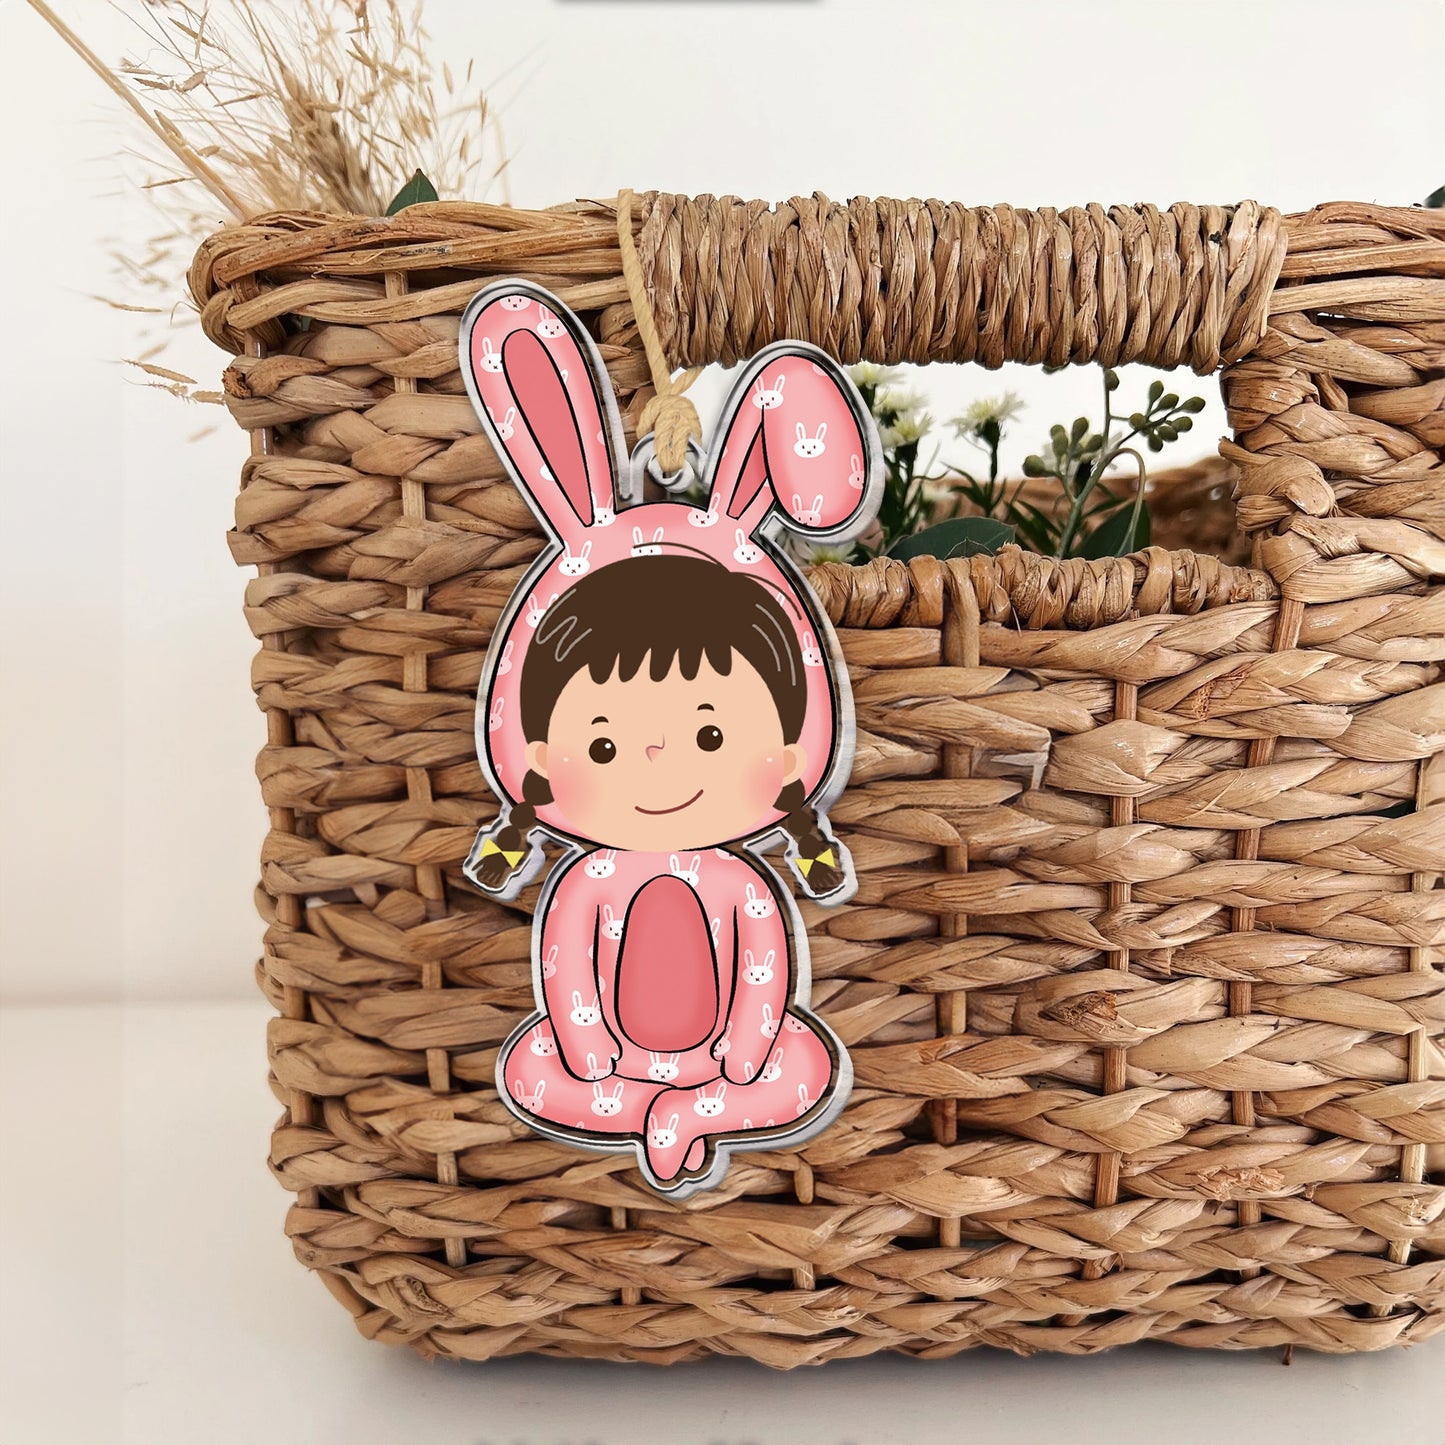 Funny Kid With Easter Bunny Costume - Personalized Easter Ornament